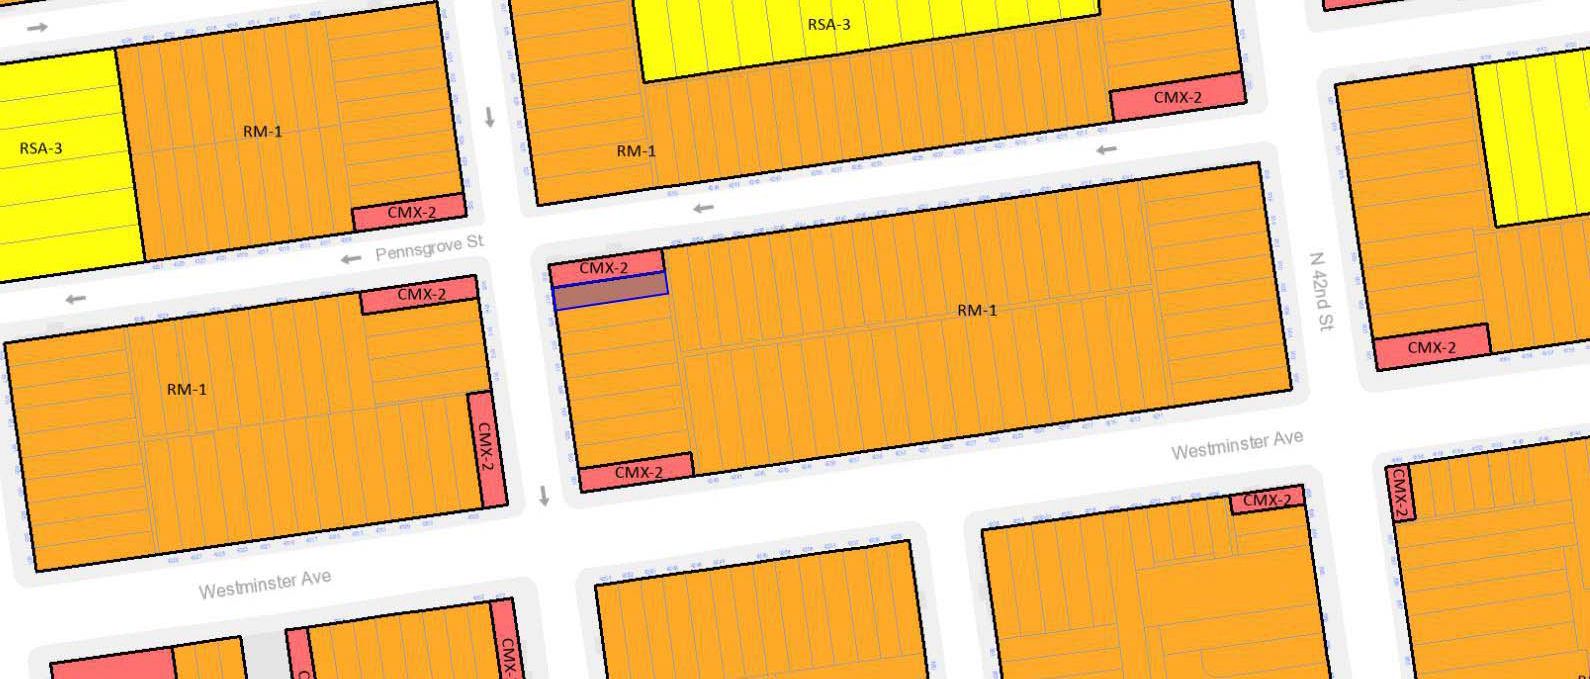 917 North 43rd Street. Zoning map. Credit: J Design and Consultants via the Department of Planning and Development of the City of Philadelphia